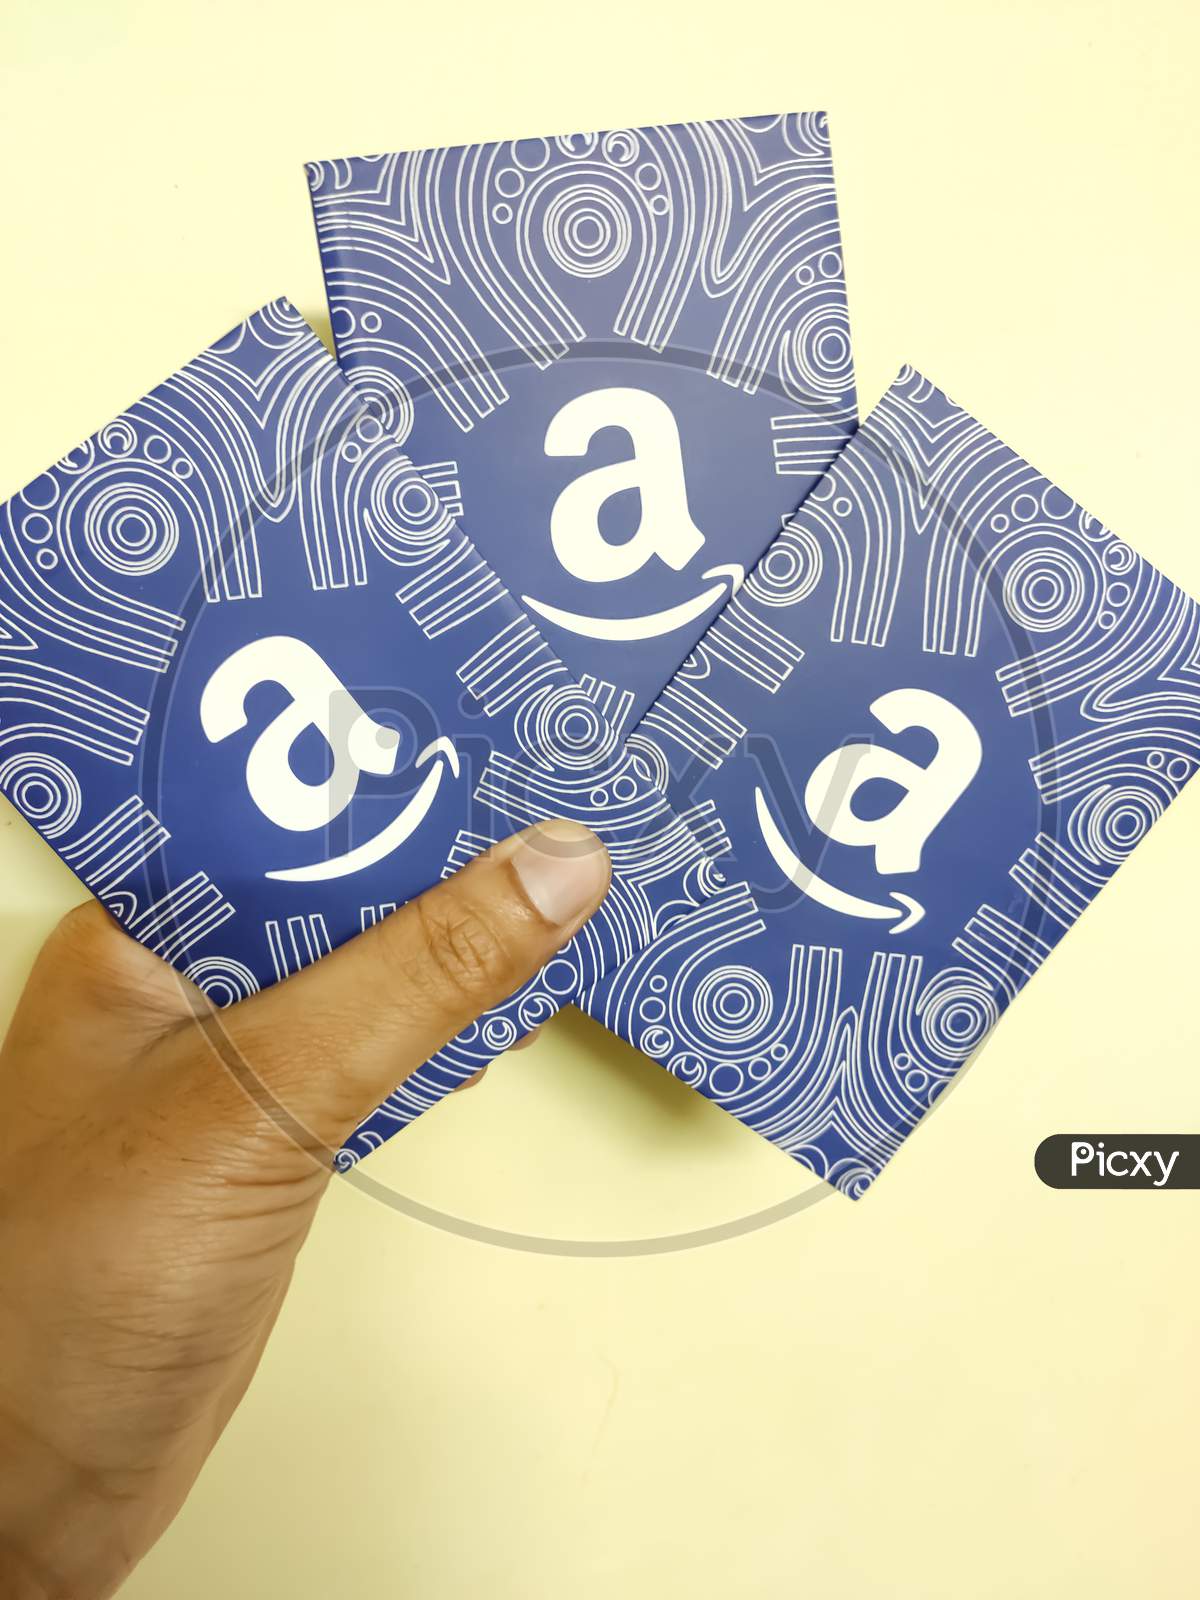 A hand holds a Amazon gift card, which allows the recipient to purchase items from the Amazon.com website